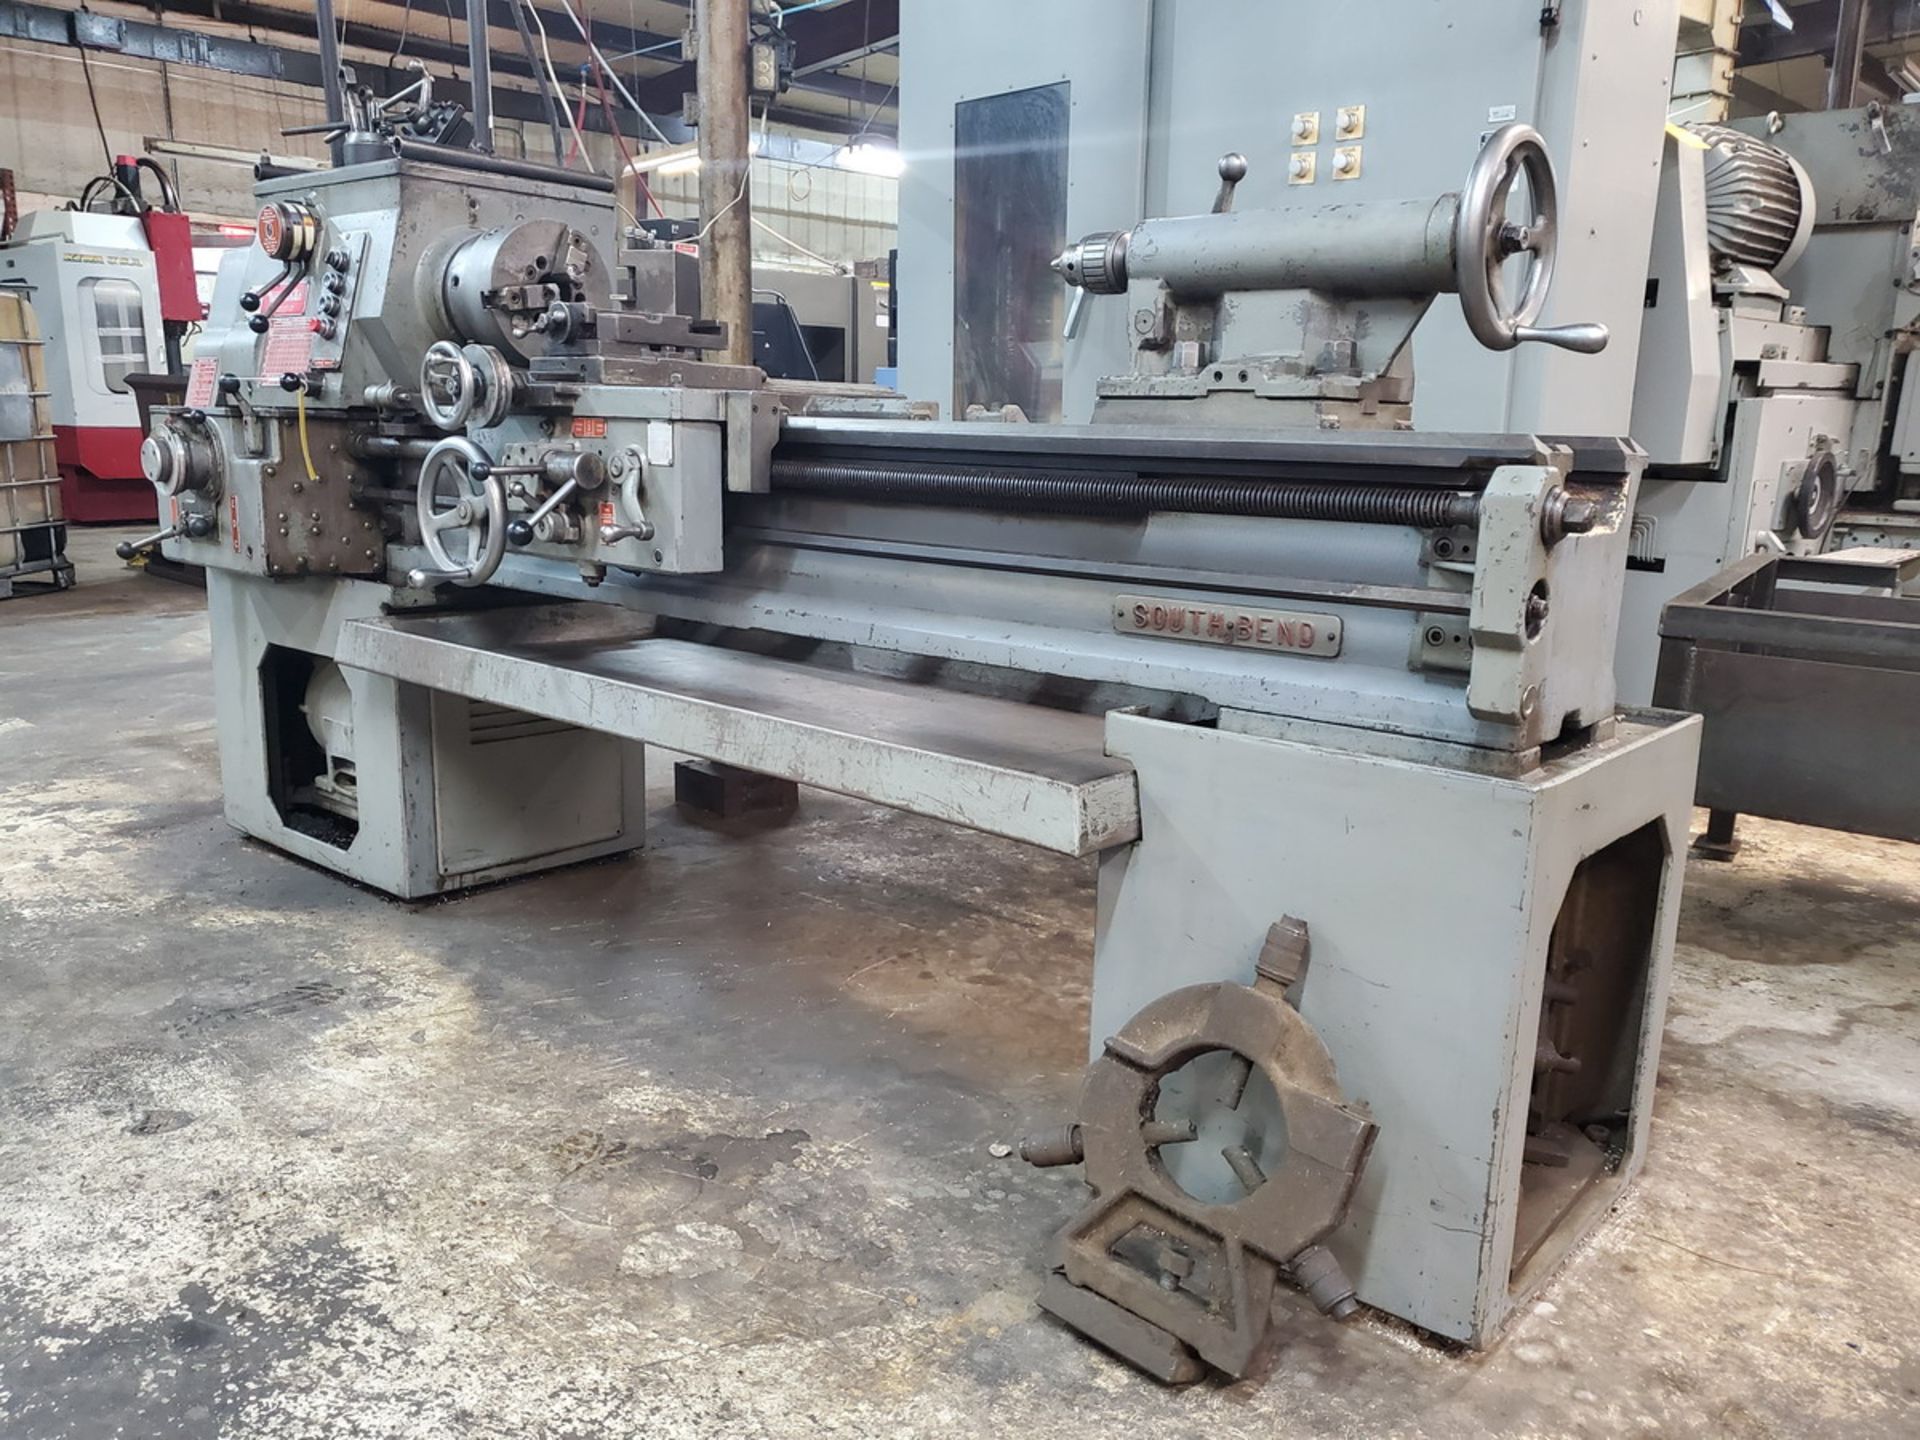 South Bend CL 170 E 17" Engine Lathe 17" Swing, 6' Bed, 53" Between Centers, 2-1/2" Thru Hole, W/ - Image 12 of 17